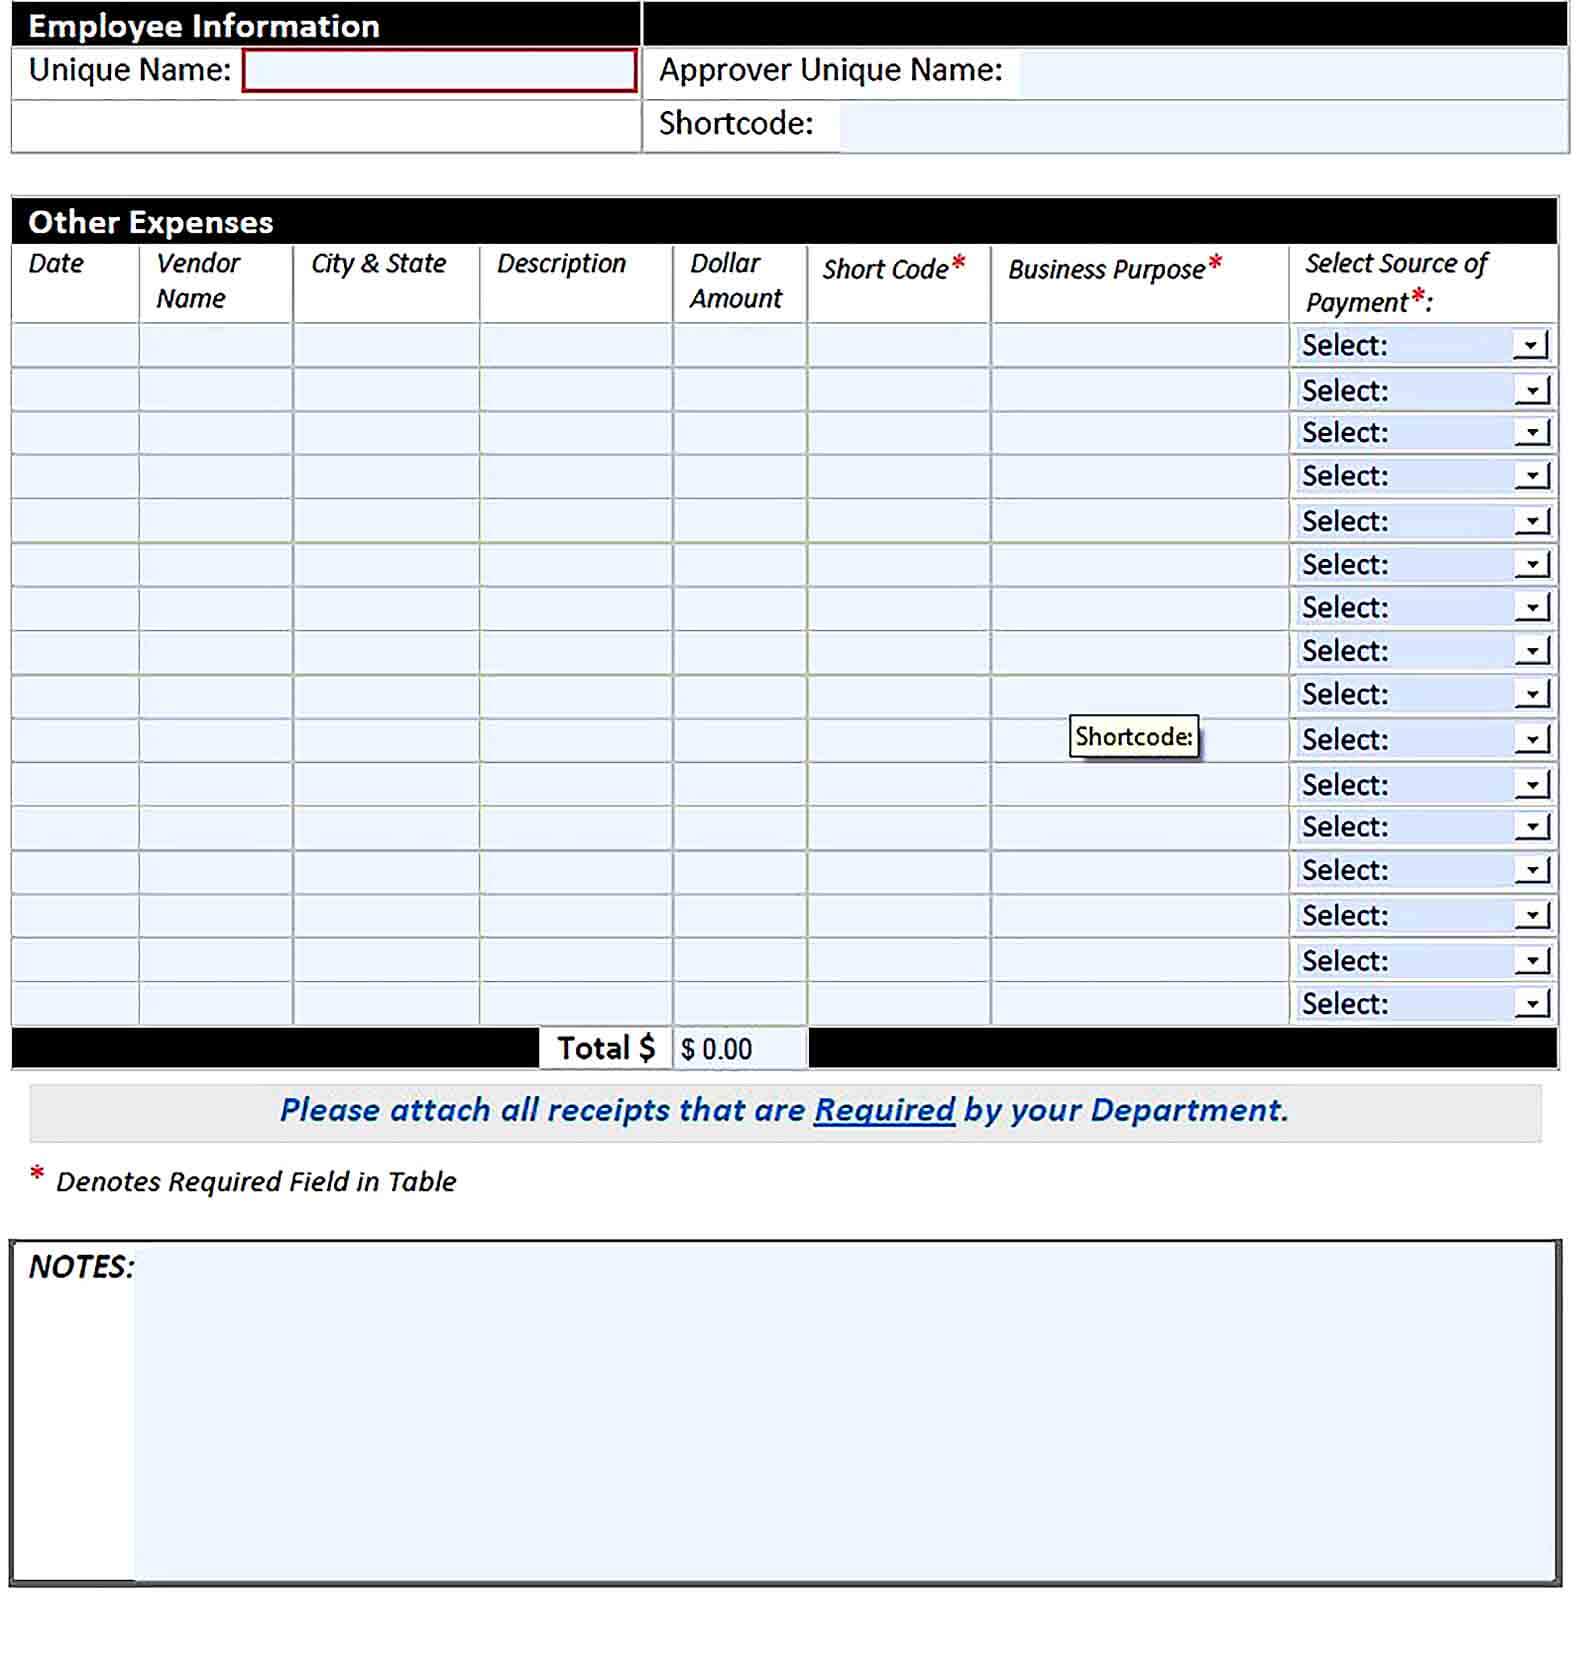 Sample Employee Expense Report in PDF